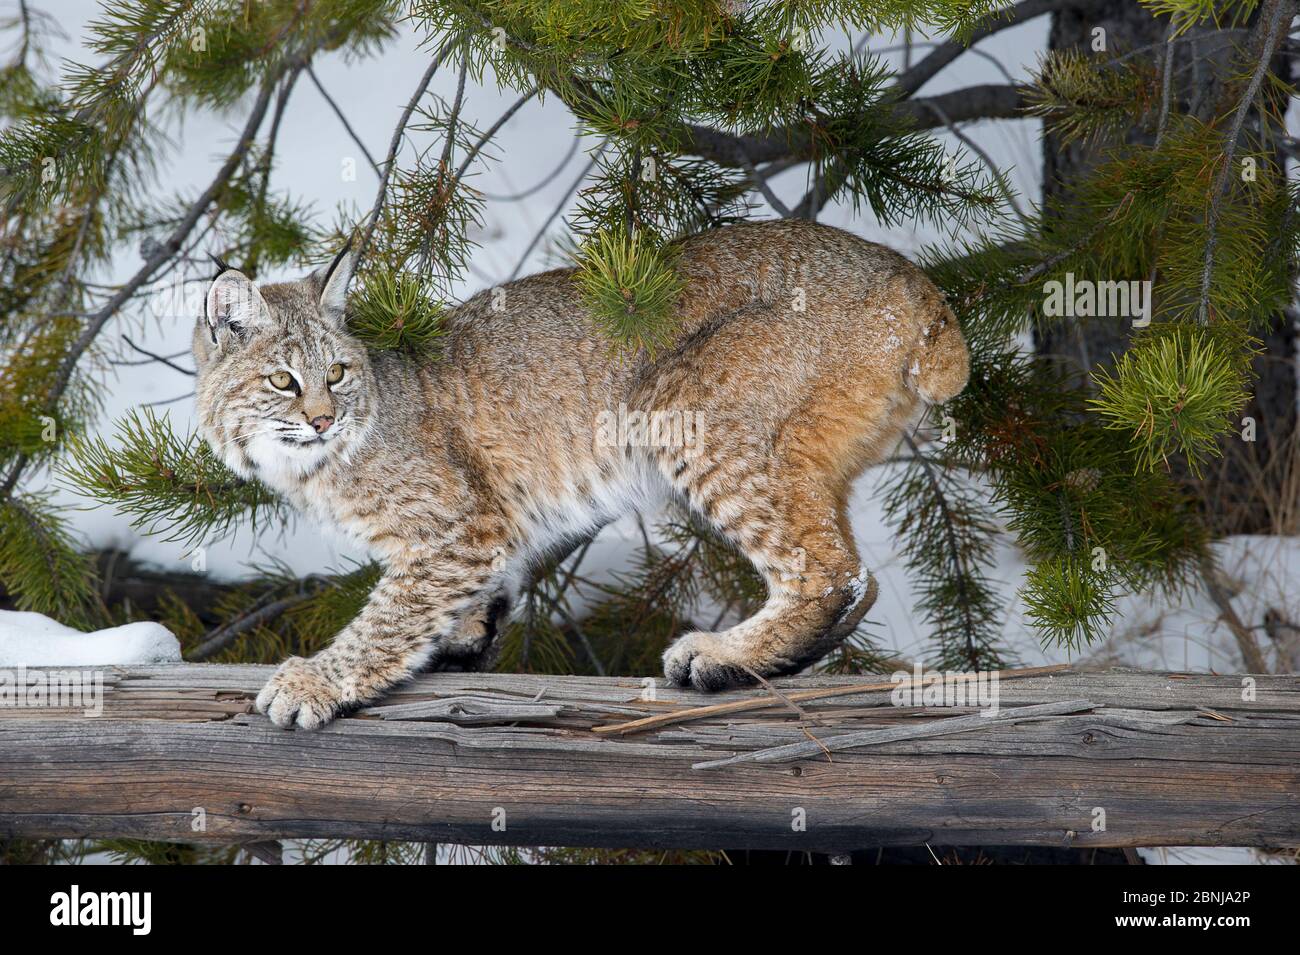 North American bobcat (Lynx rufus) scratching / sharpening its claws on fallen tree trunk. Madison River Valley, Yellowstone National Park, Wyoming, U Stock Photo